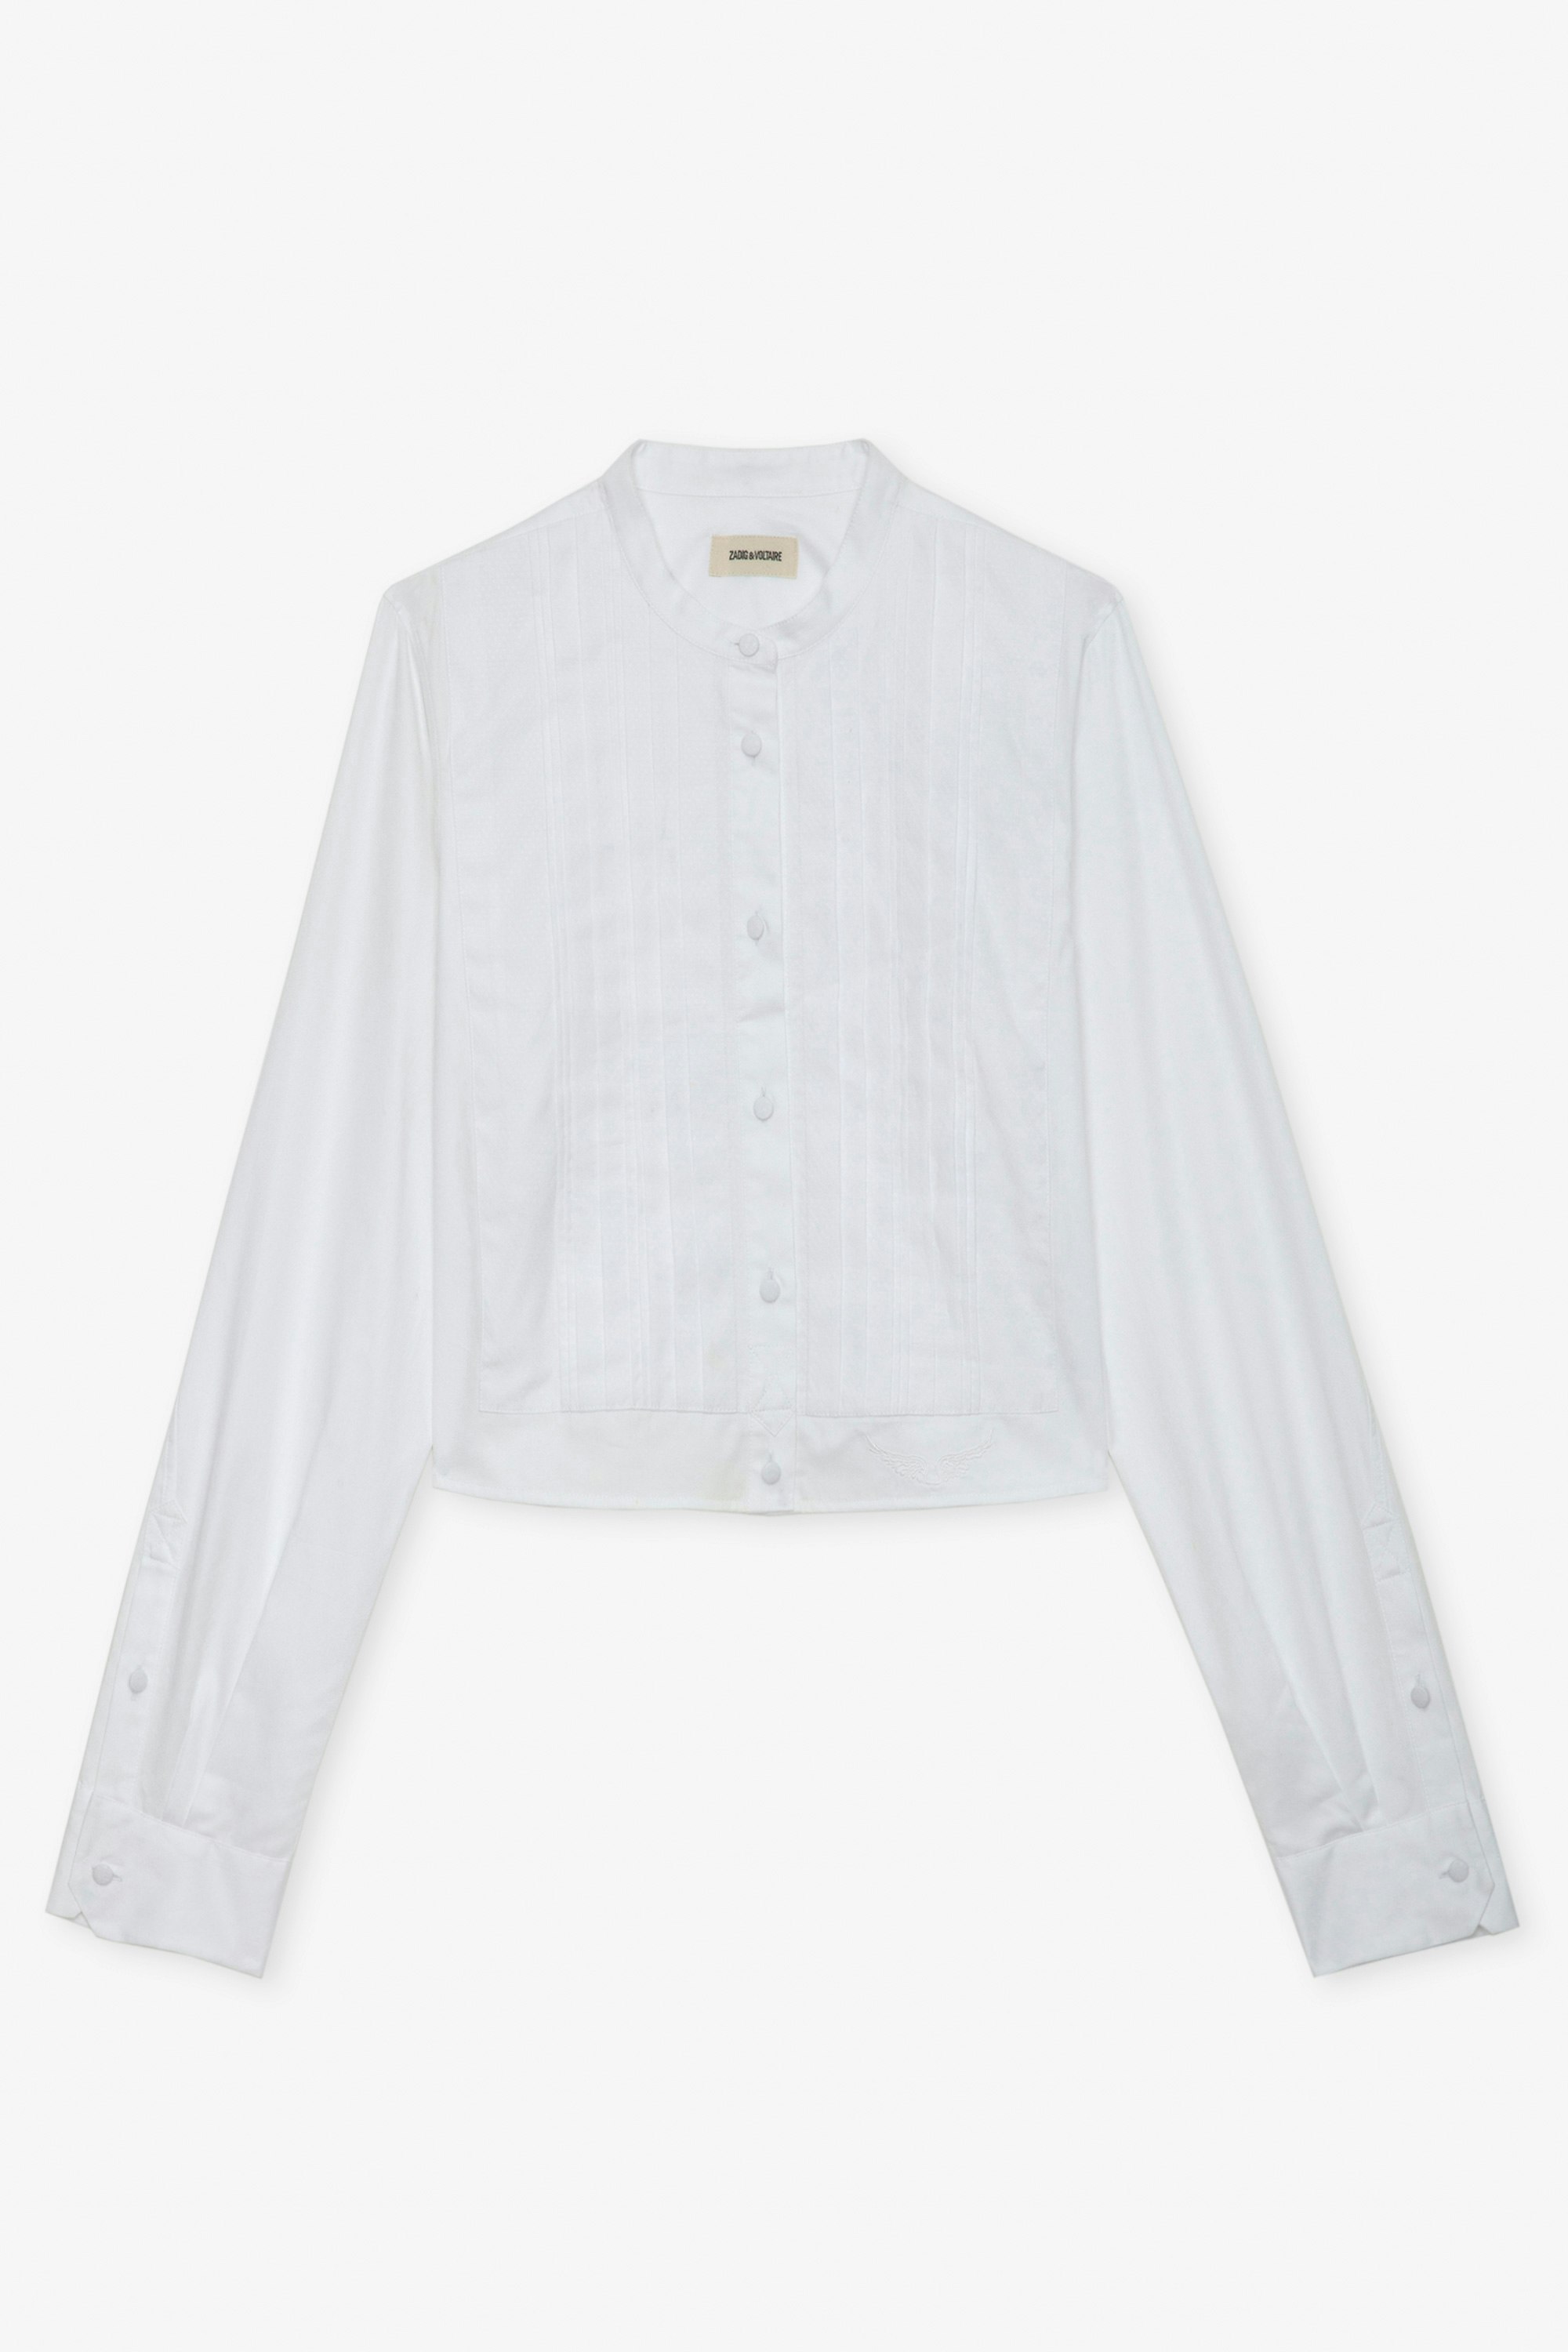 Theby Shirt - White cotton cropped shirt with wings embroidery and pleat details.